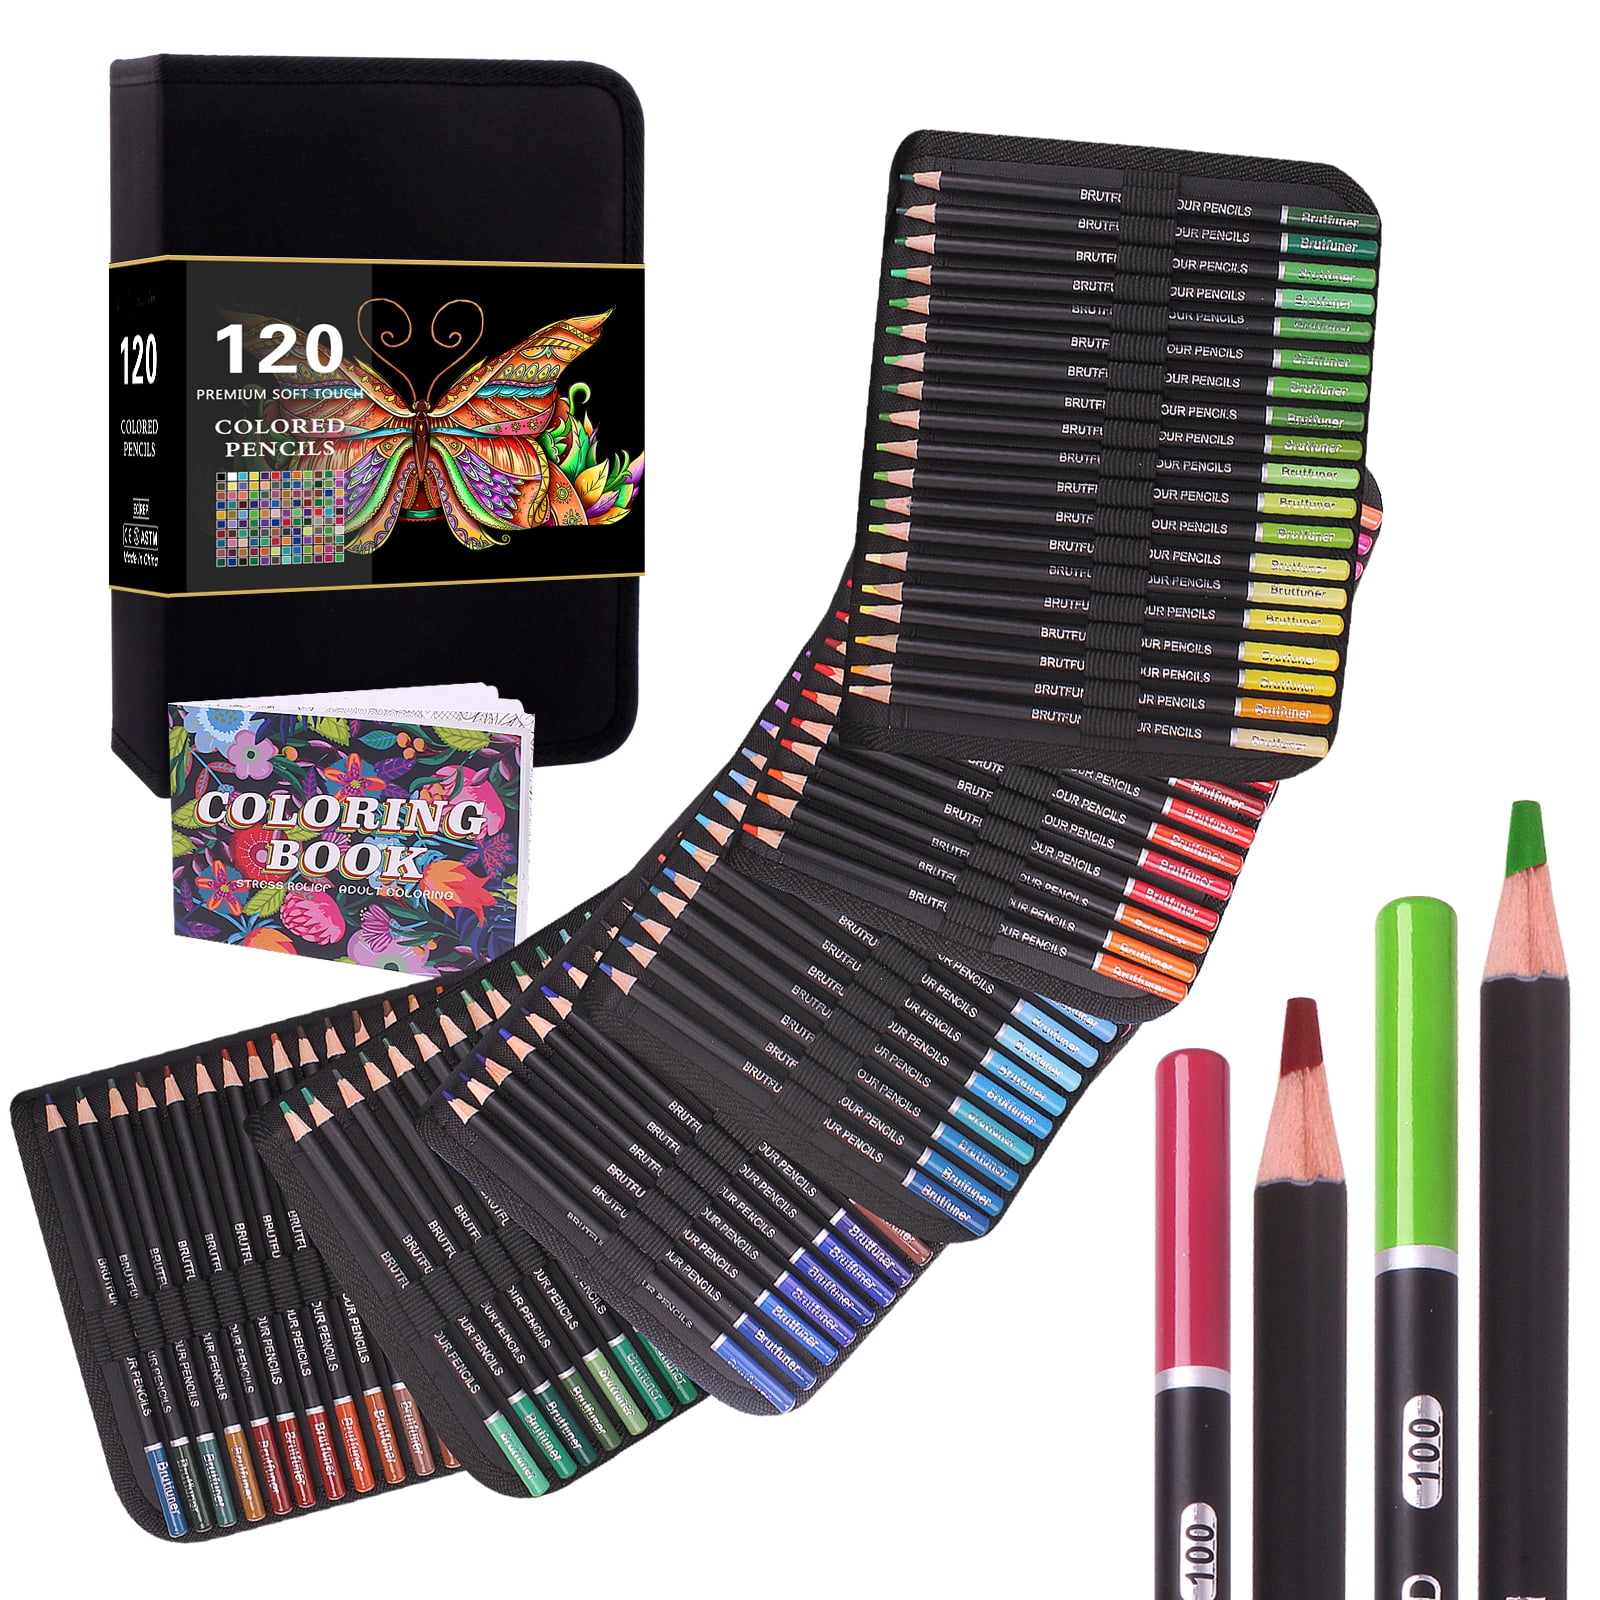 iBayam 72 Count Colored Pencil Set for Adult Coloring - Soft Core Drawing  Pencils, Art Supplies for Adults, Kids - School Supplies, Stocking Stuffers